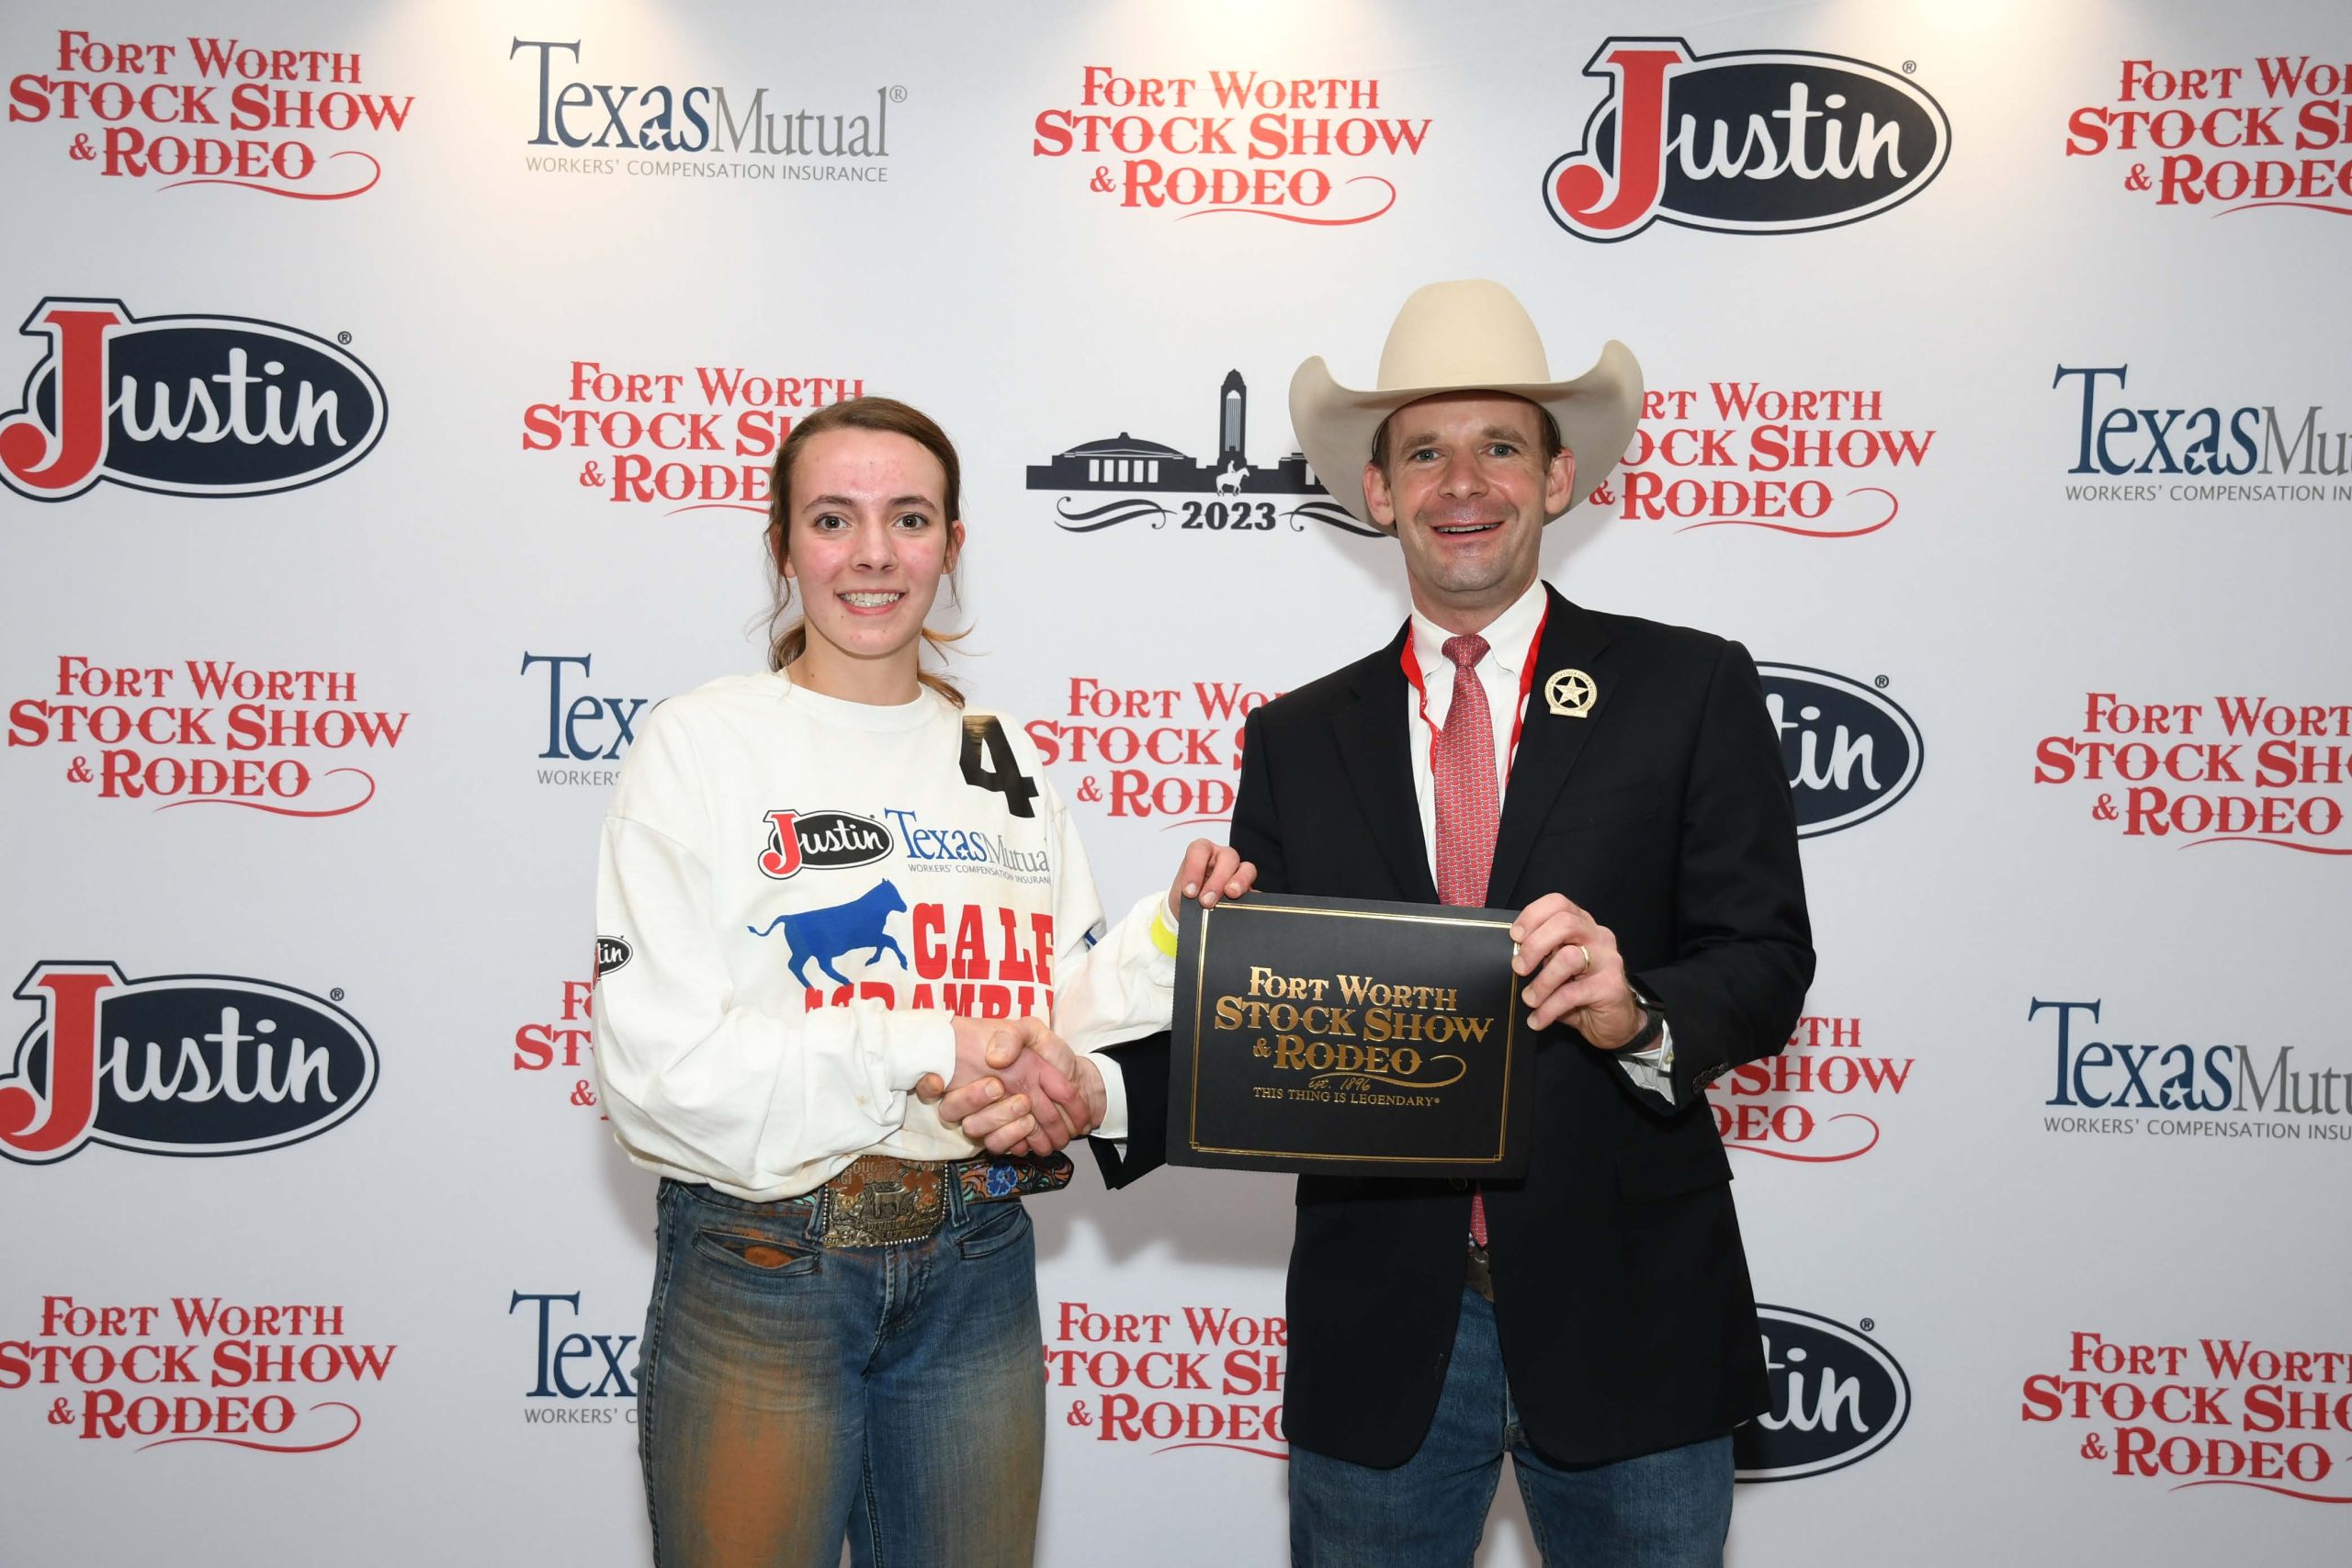 CLHS Junior Catches a Calf at Fort Worth Stock Show & Rodeo's Calf